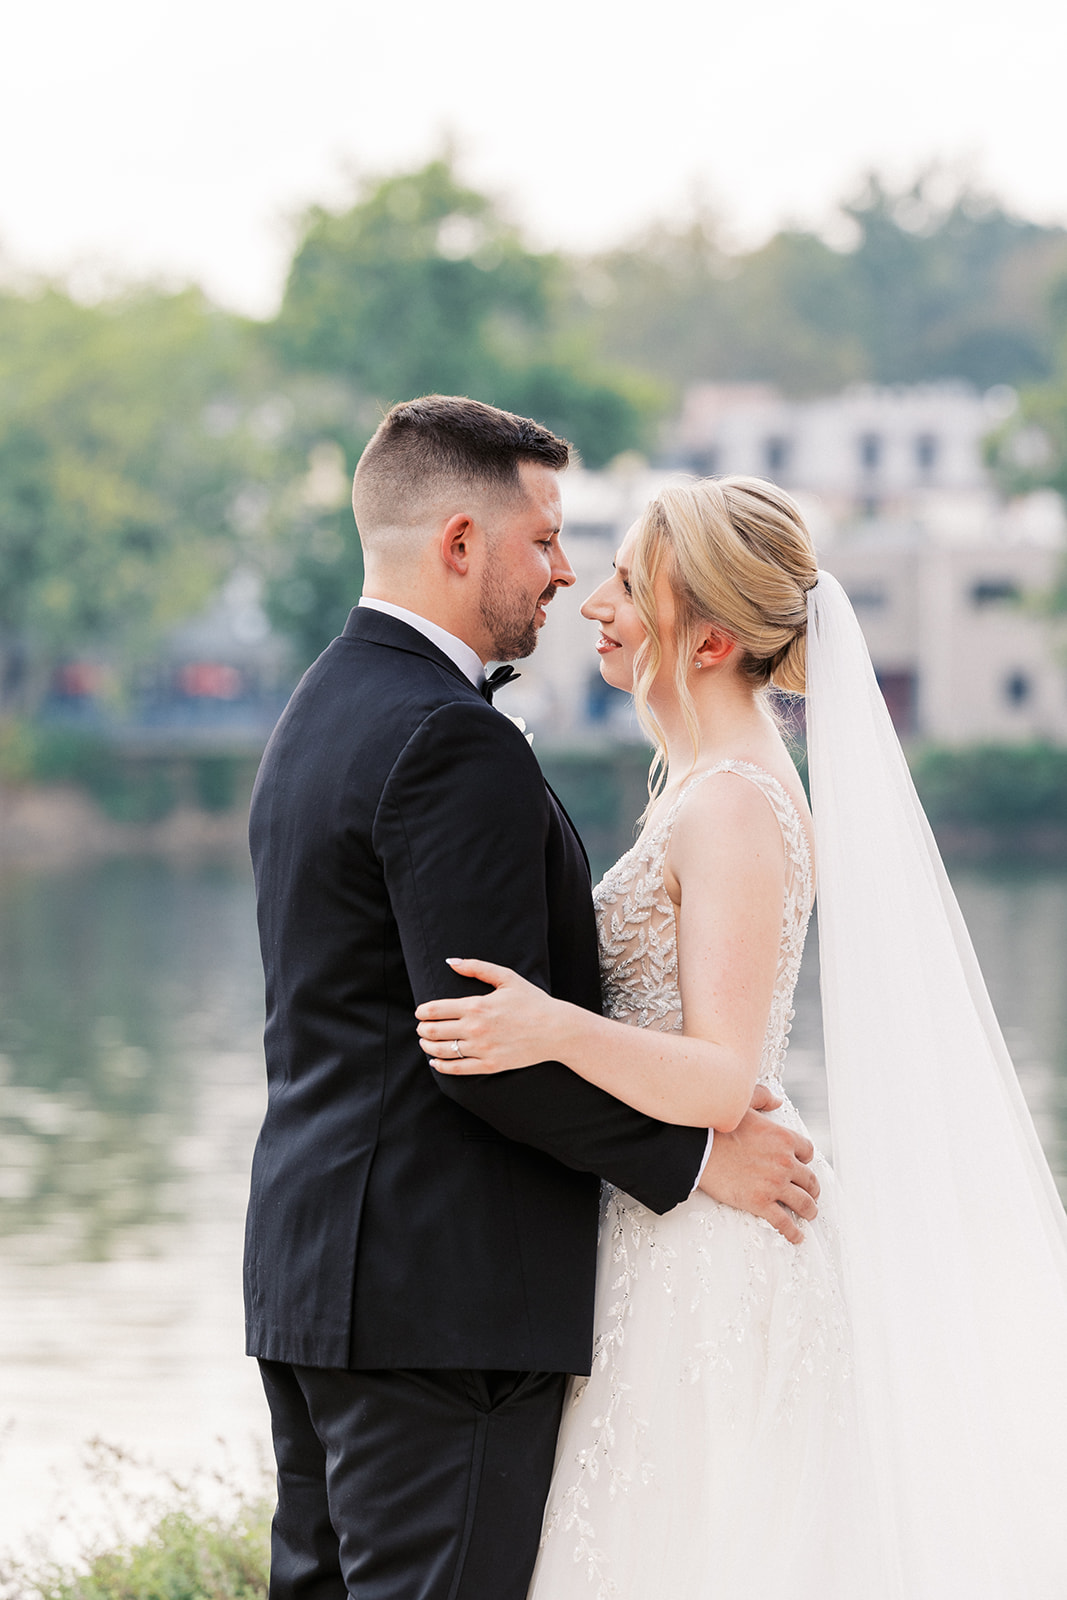 Newlyweds lean in for a kiss while hugging on the edge of a river